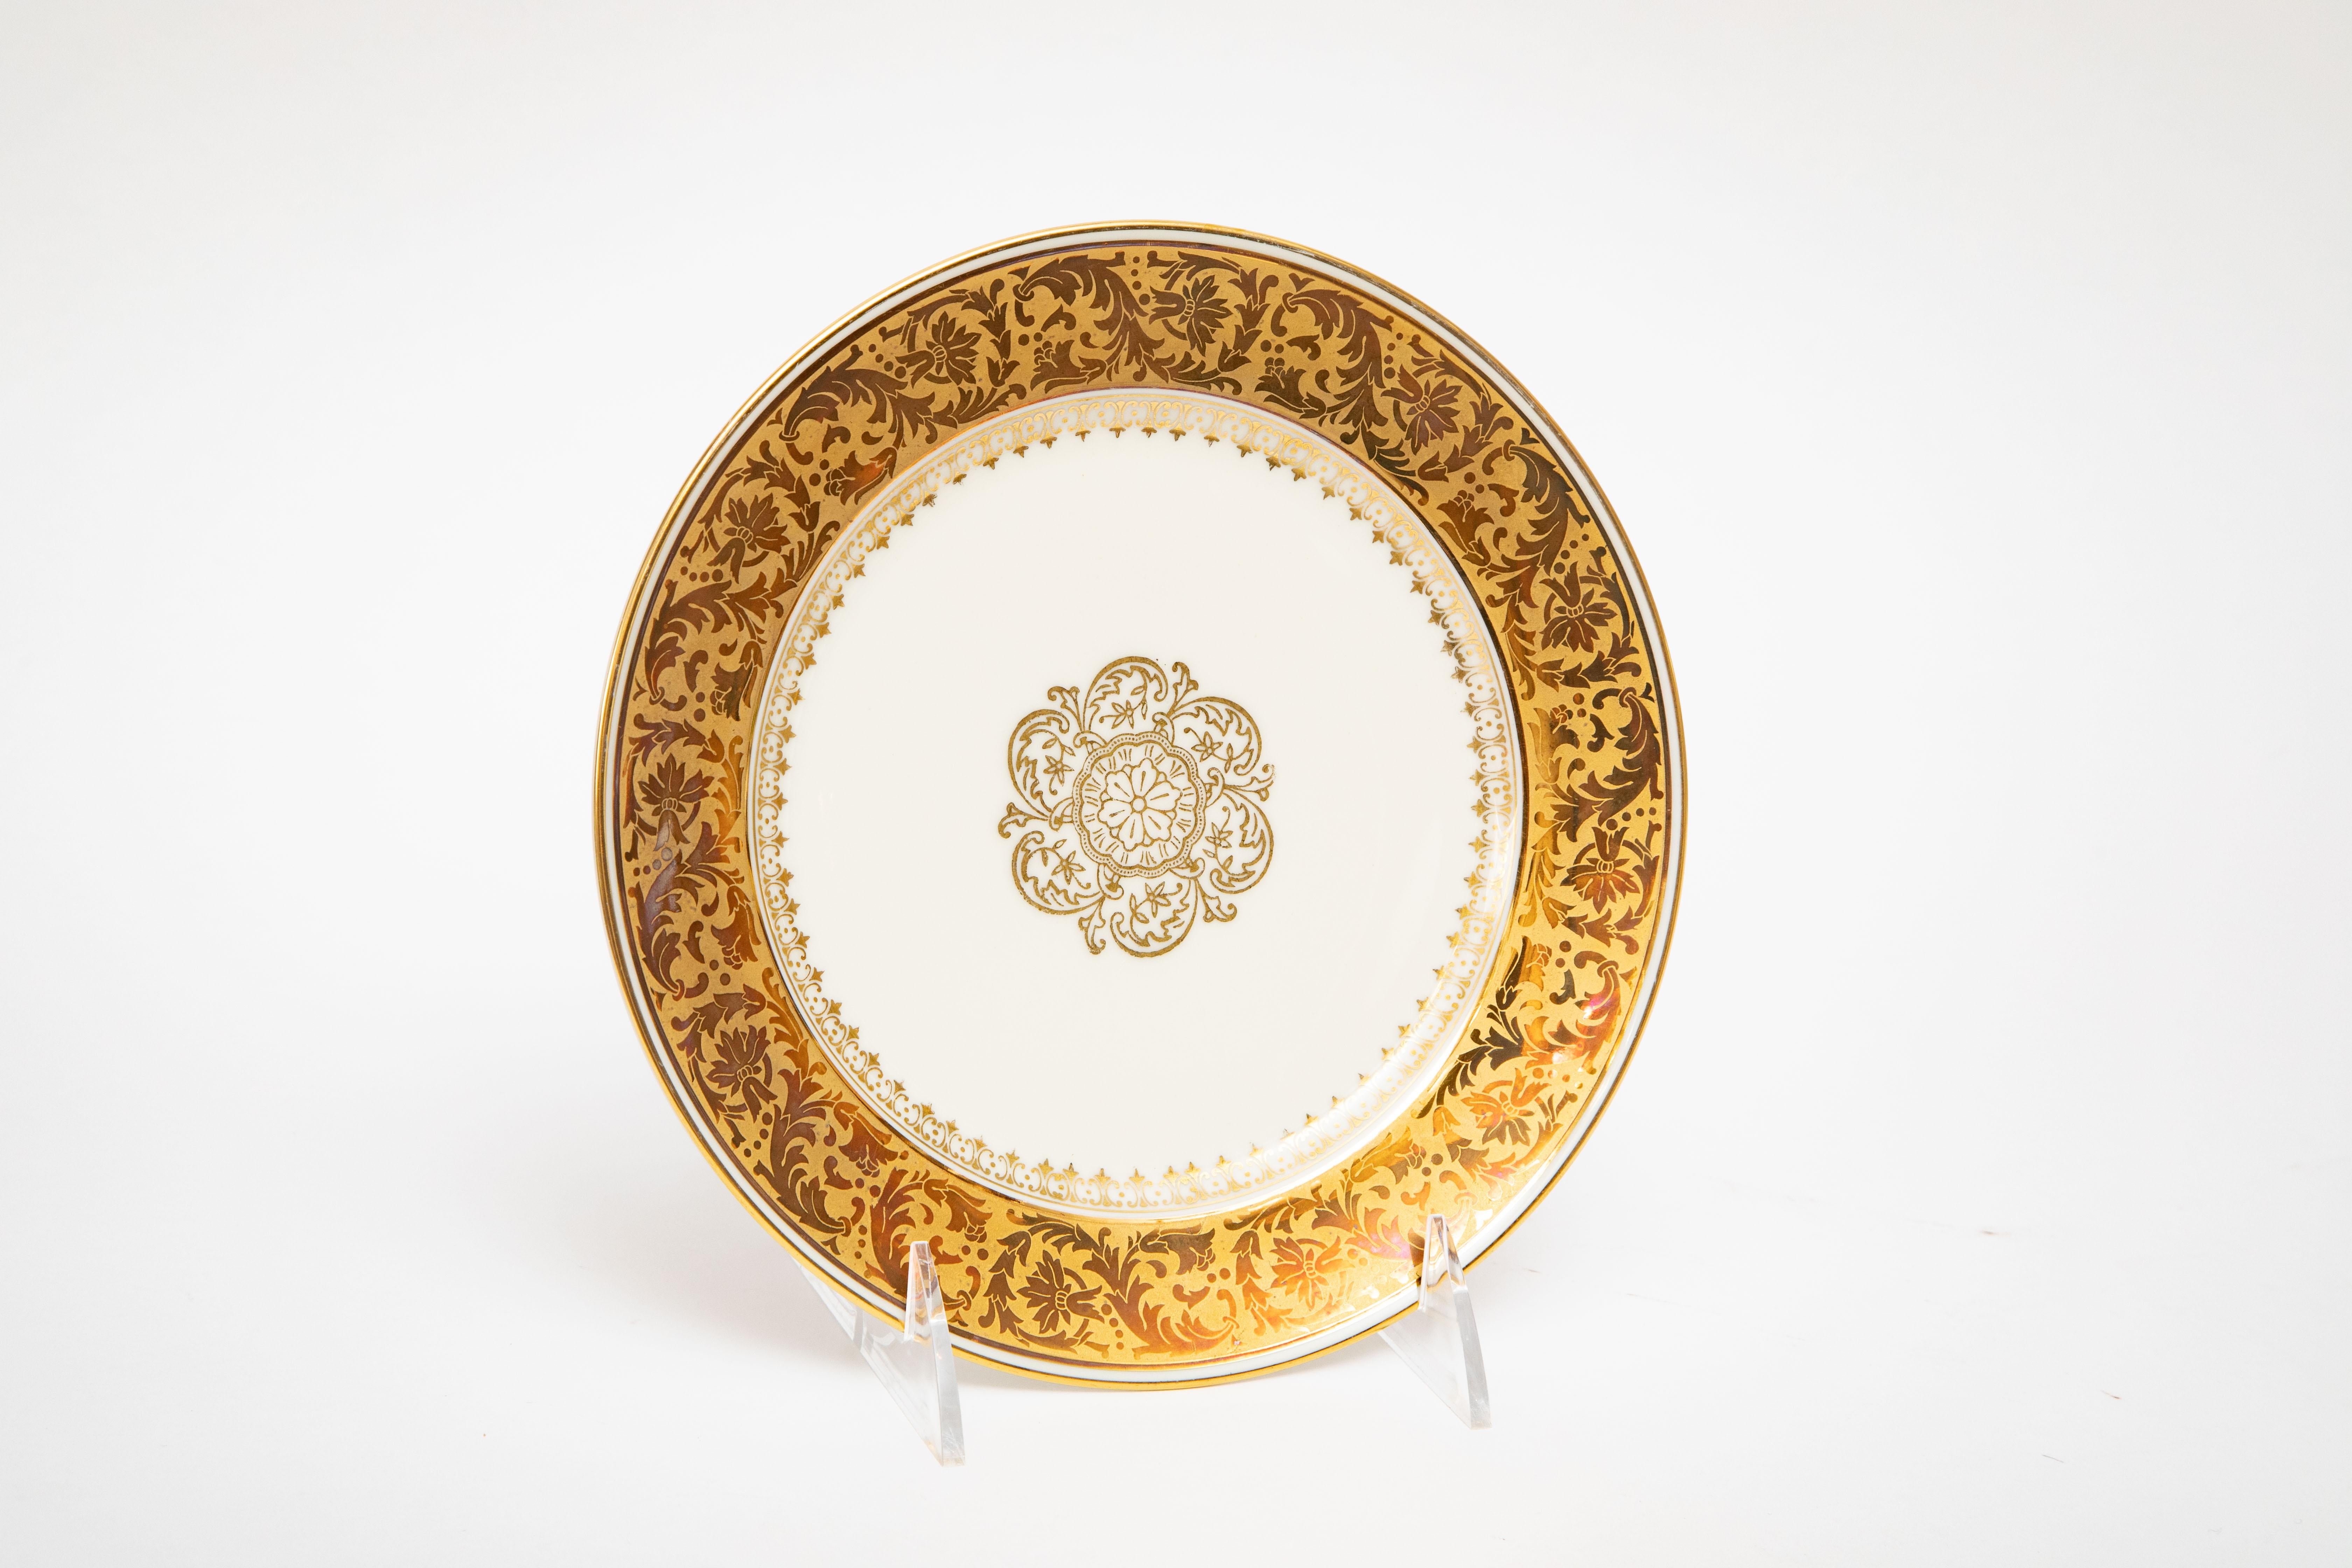 Early 20th Century Antique Wide Gold Trim Dinner Service with 22 Dinner Plates, 56 Pieces Total For Sale